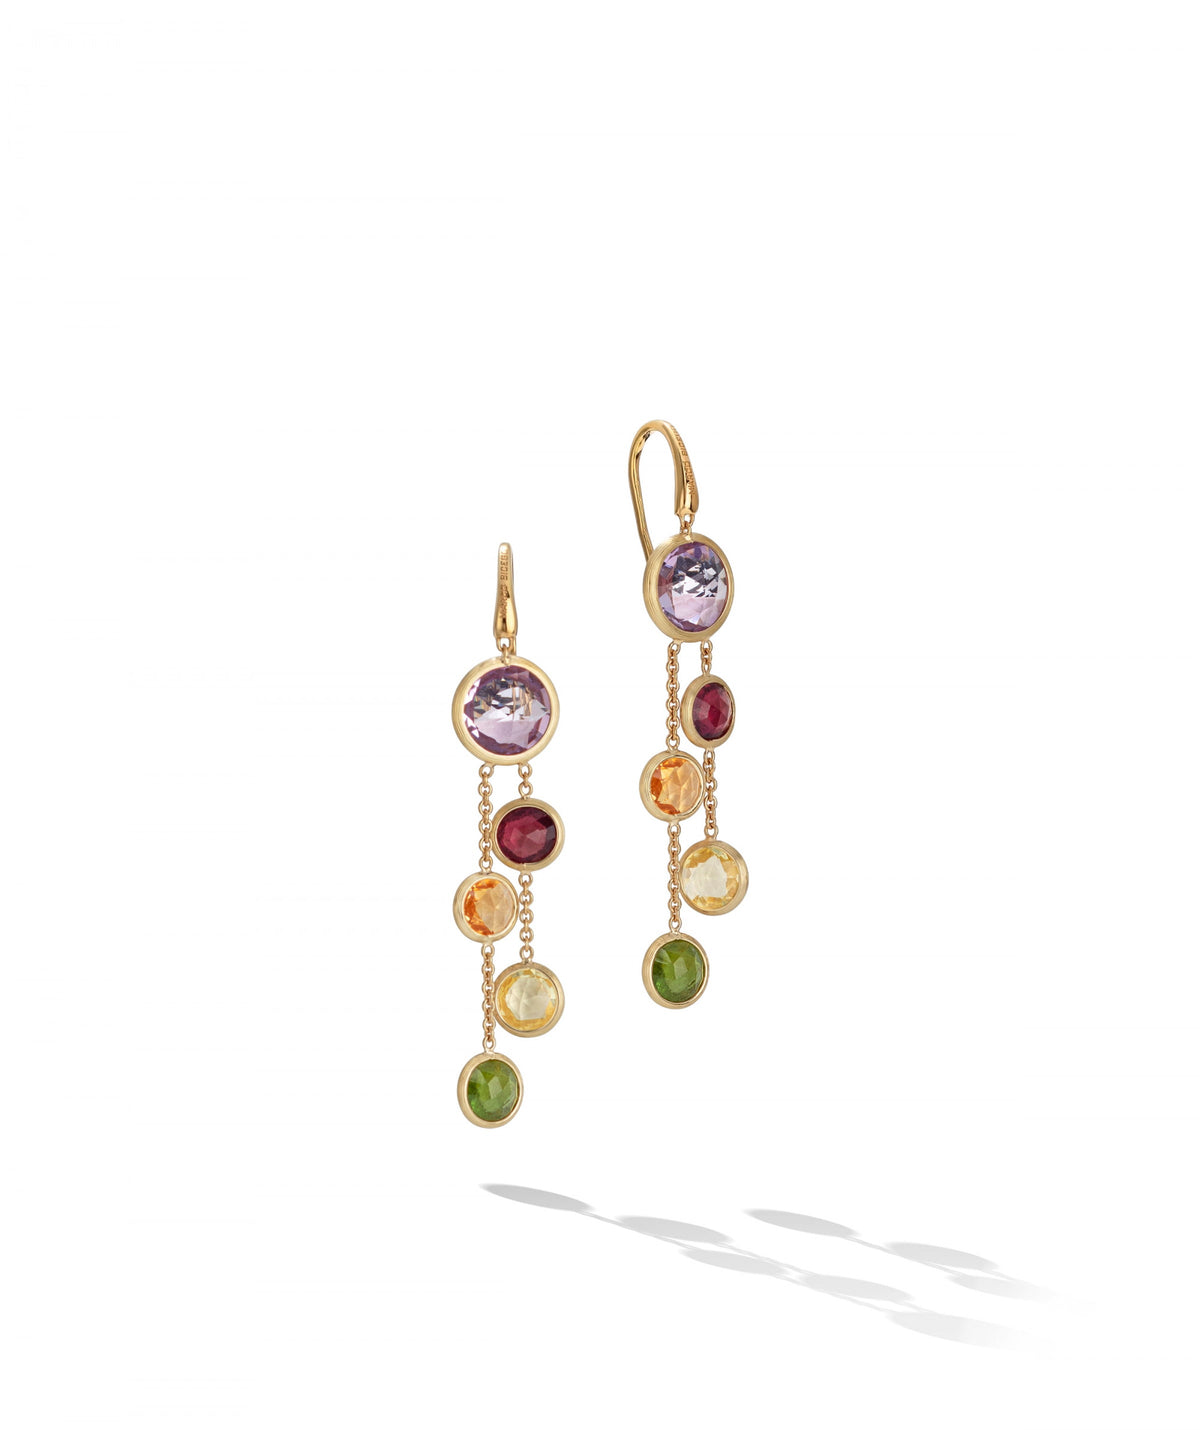 Jaipur Colour Drop Earrings with French Hook in 18k Yellow Gold with Mixed Gemstones - Orsini Jewellers NZ